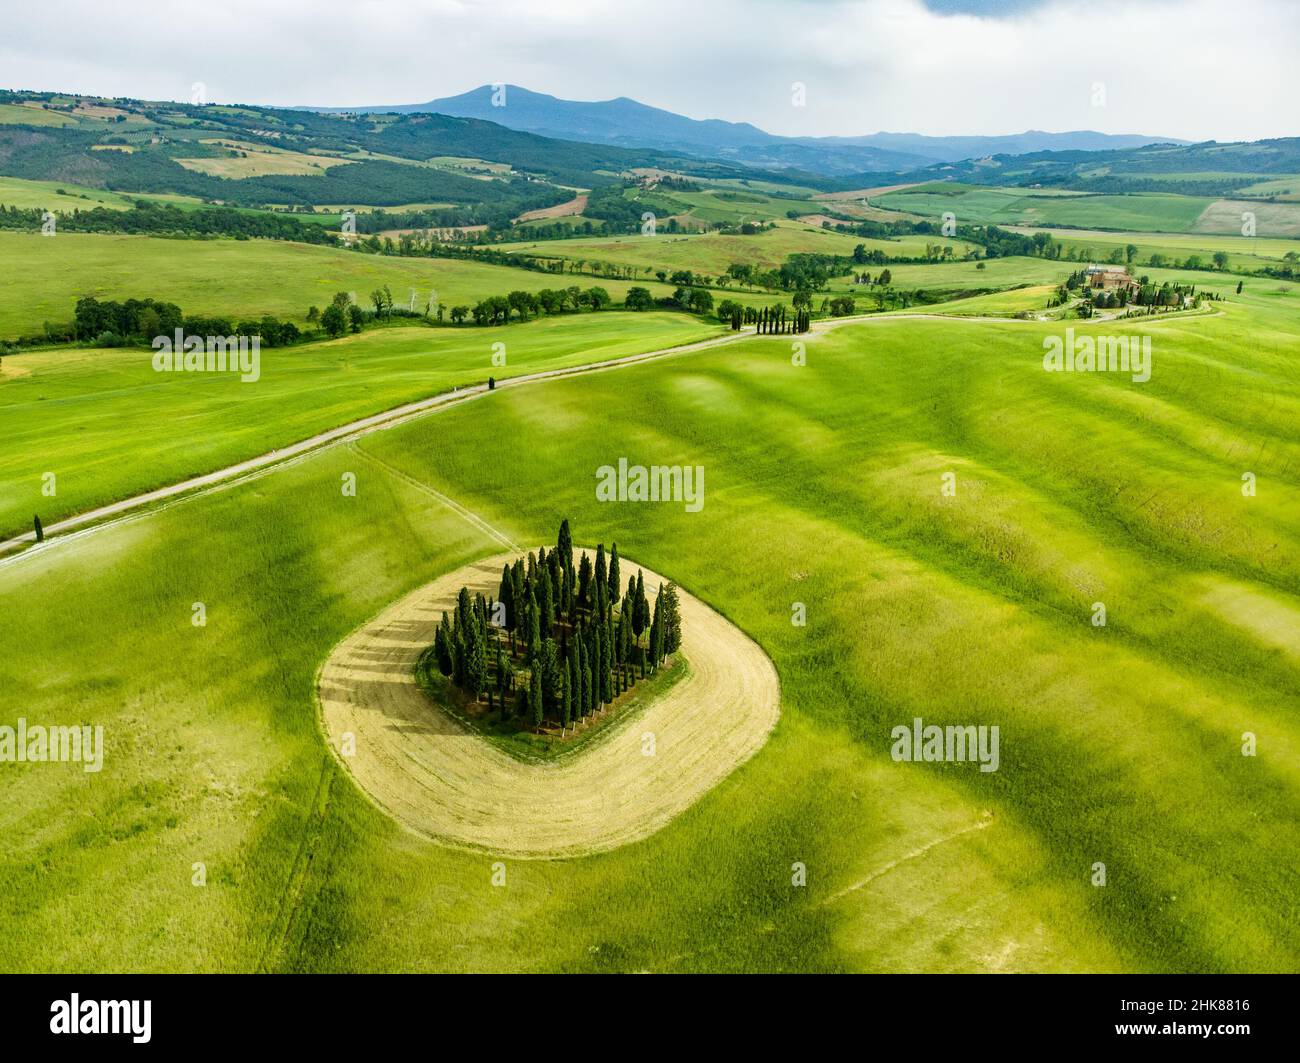 Stunning aerial view of green fields and farmlands with a group of cypress trees in the middle. Summer rural landscape of rolling hills, curved roads Stock Photo